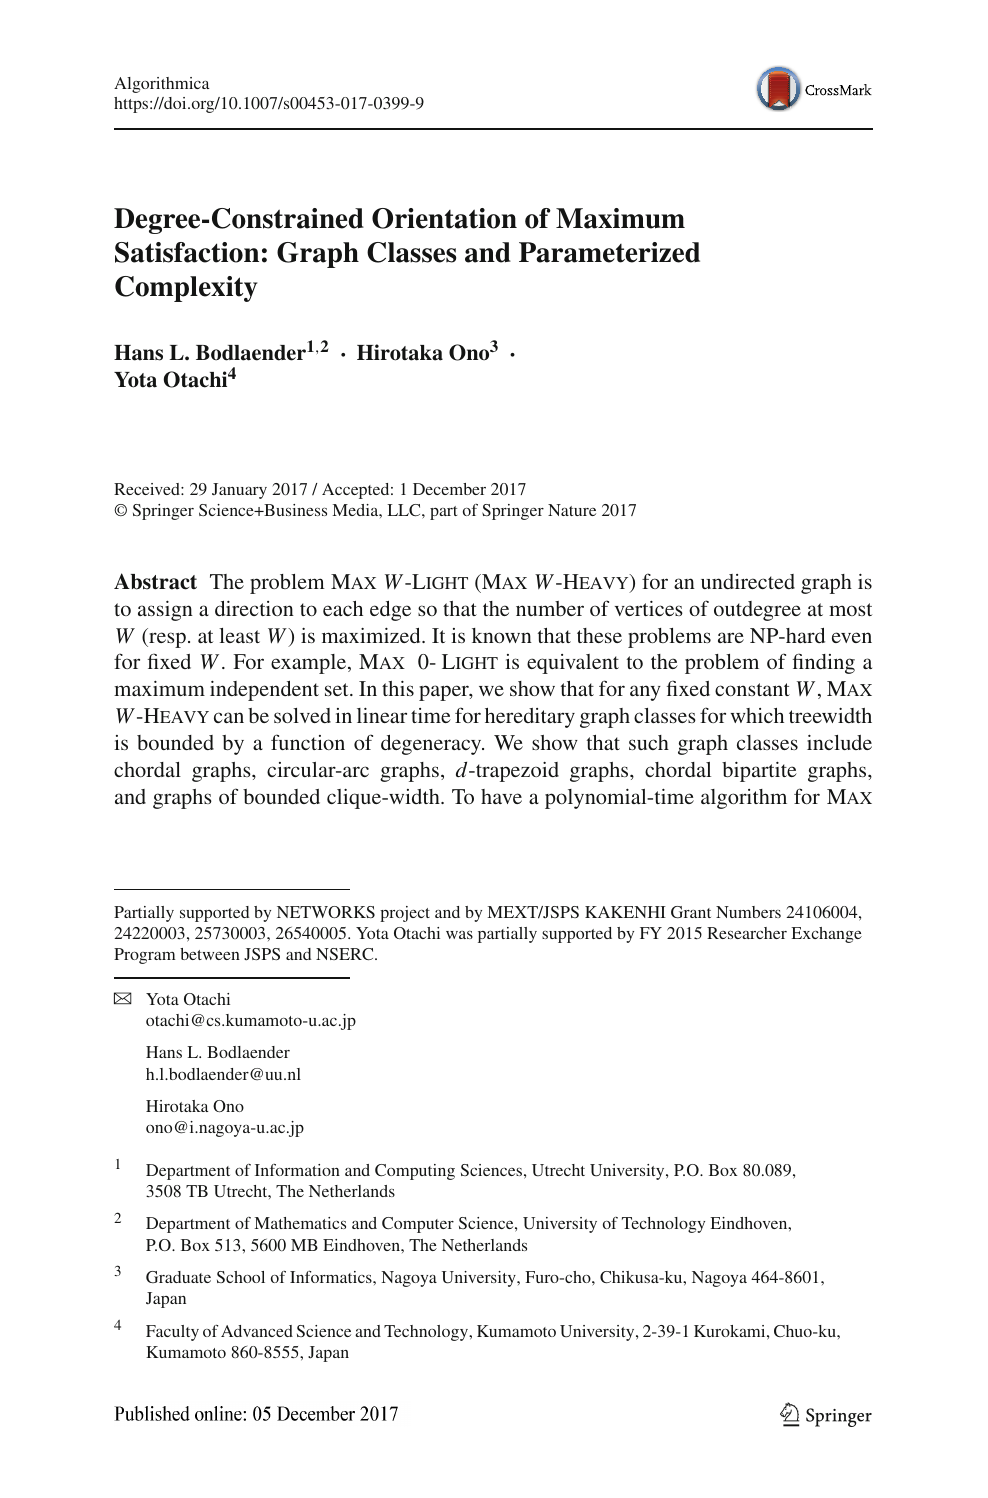 Degree Constrained Orientation Of Maximum Satisfaction Graph Classes And Parameterized Complexity Topic Of Research Paper In Computer And Information Sciences Download Scholarly Article Pdf And Read For Free On Cyberleninka Open Science